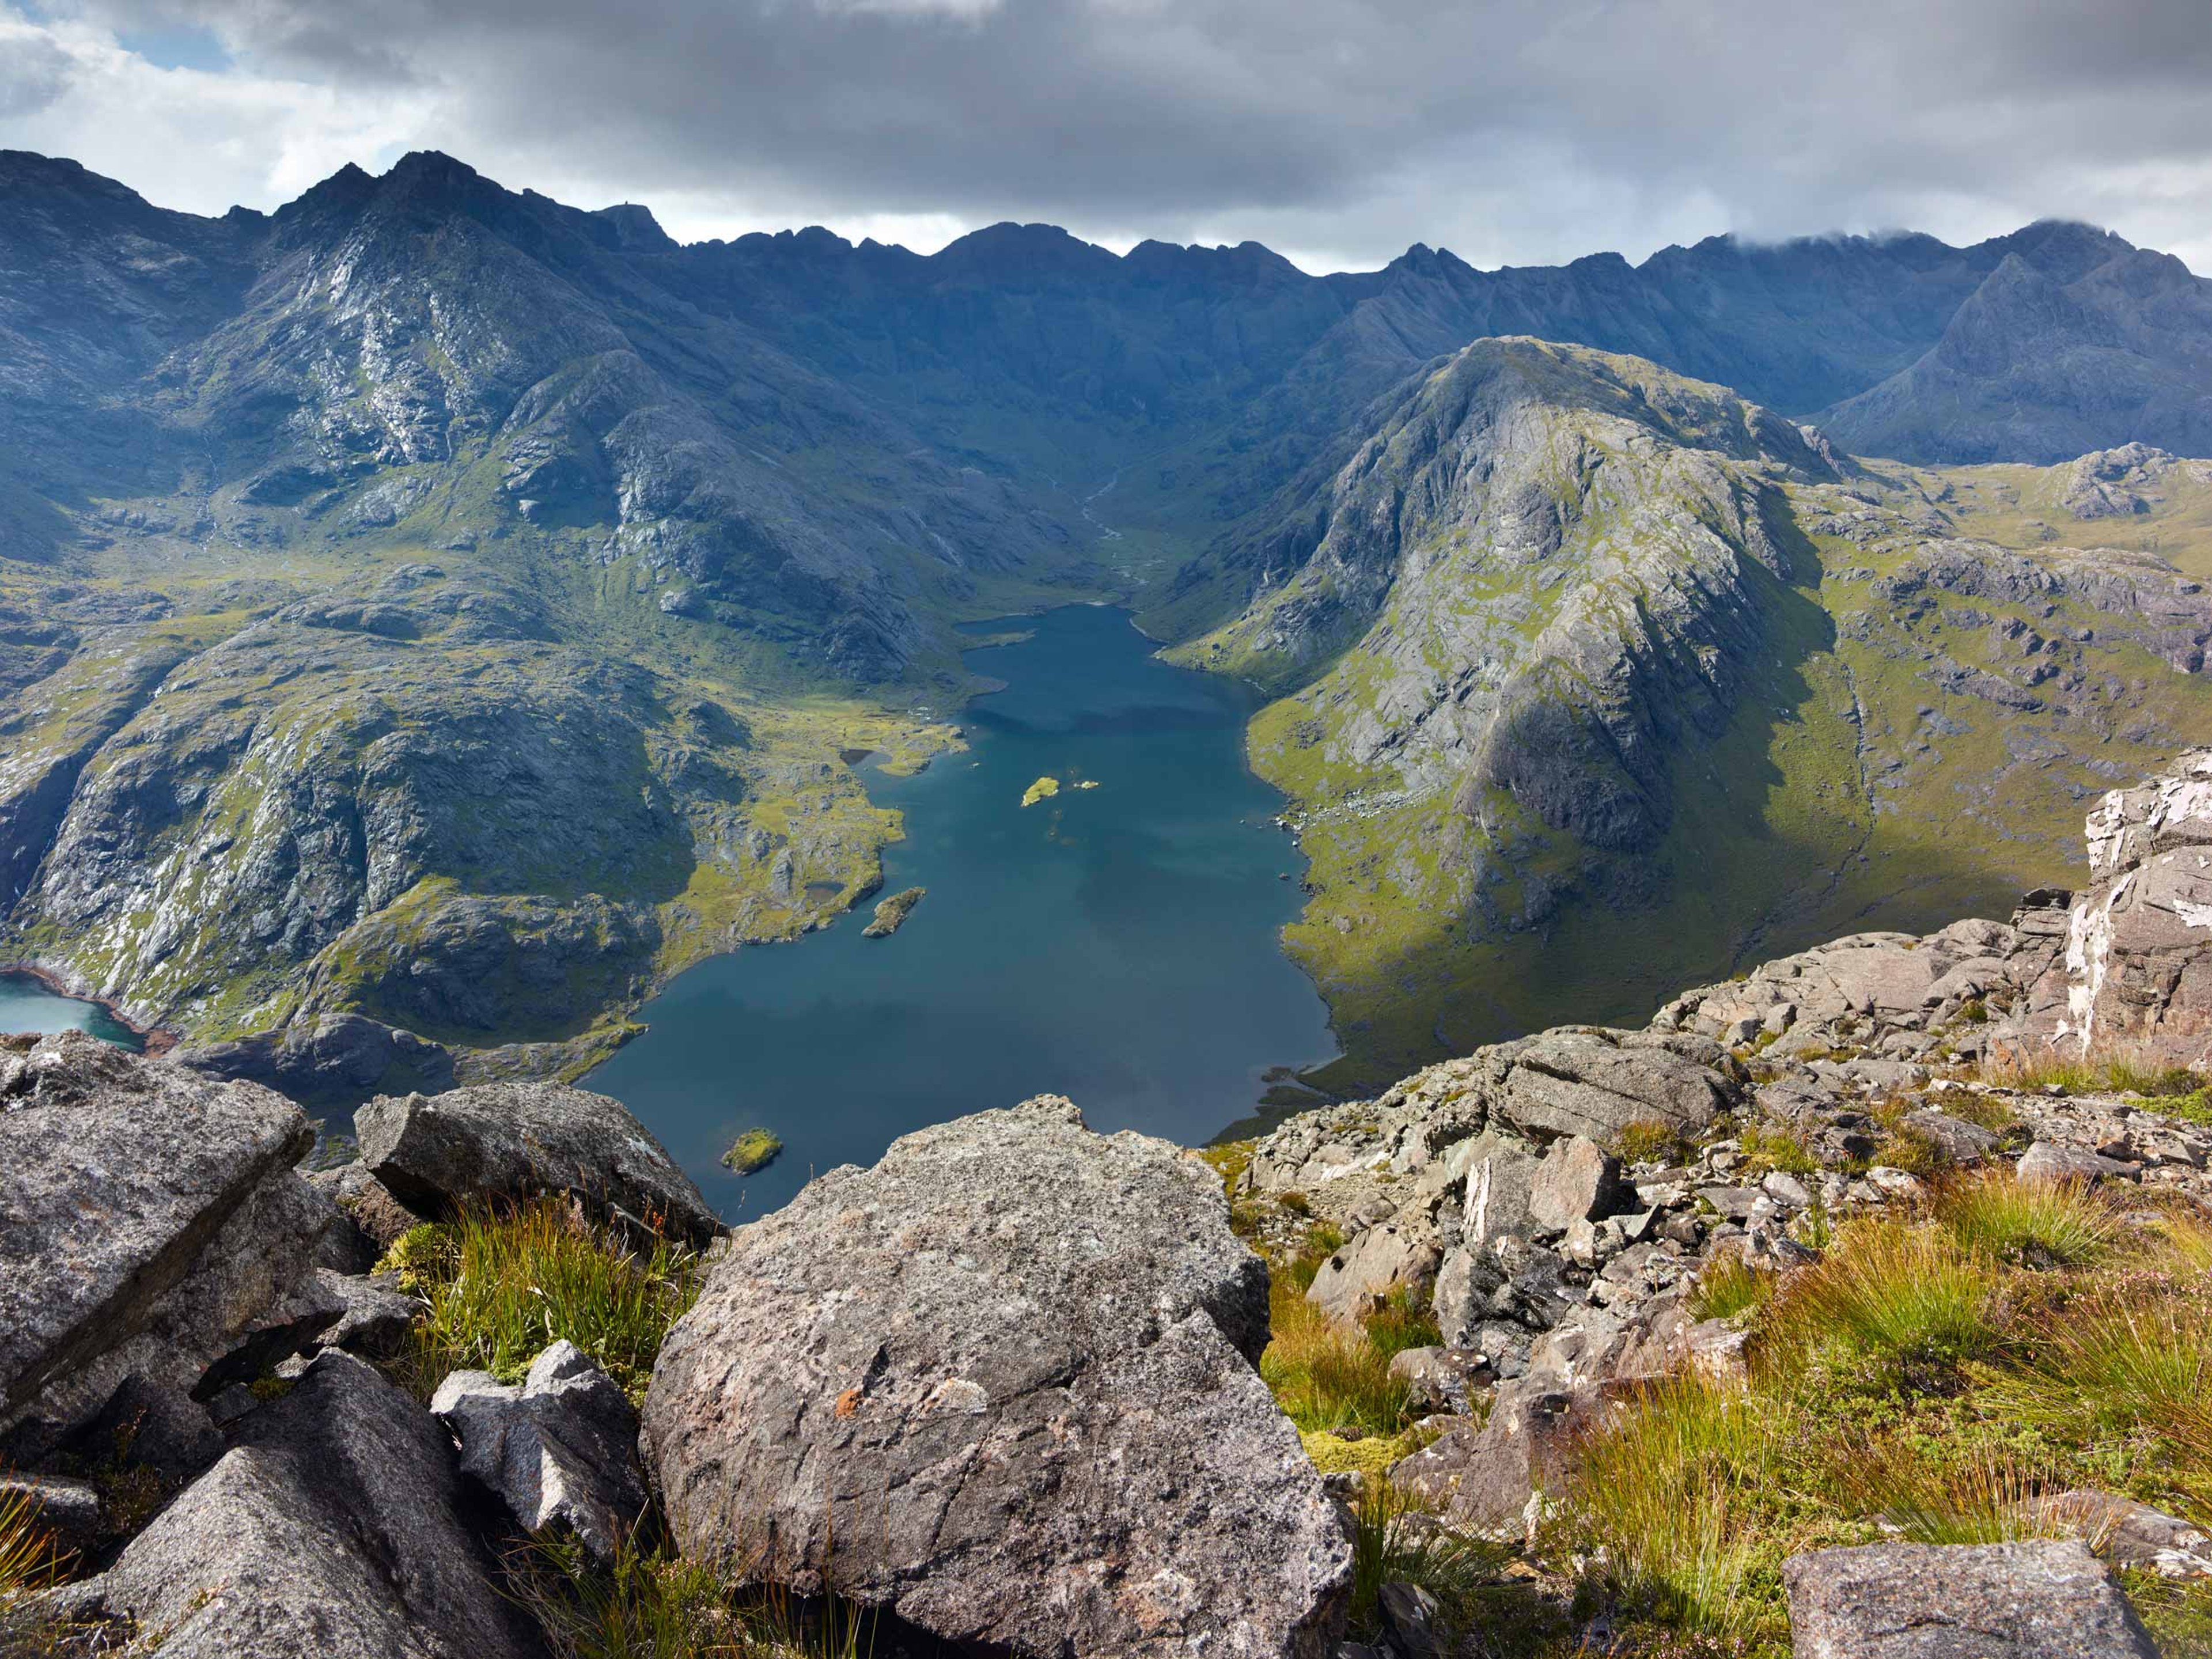 Loch Coruisk viewed from a moantain top from above the valley.